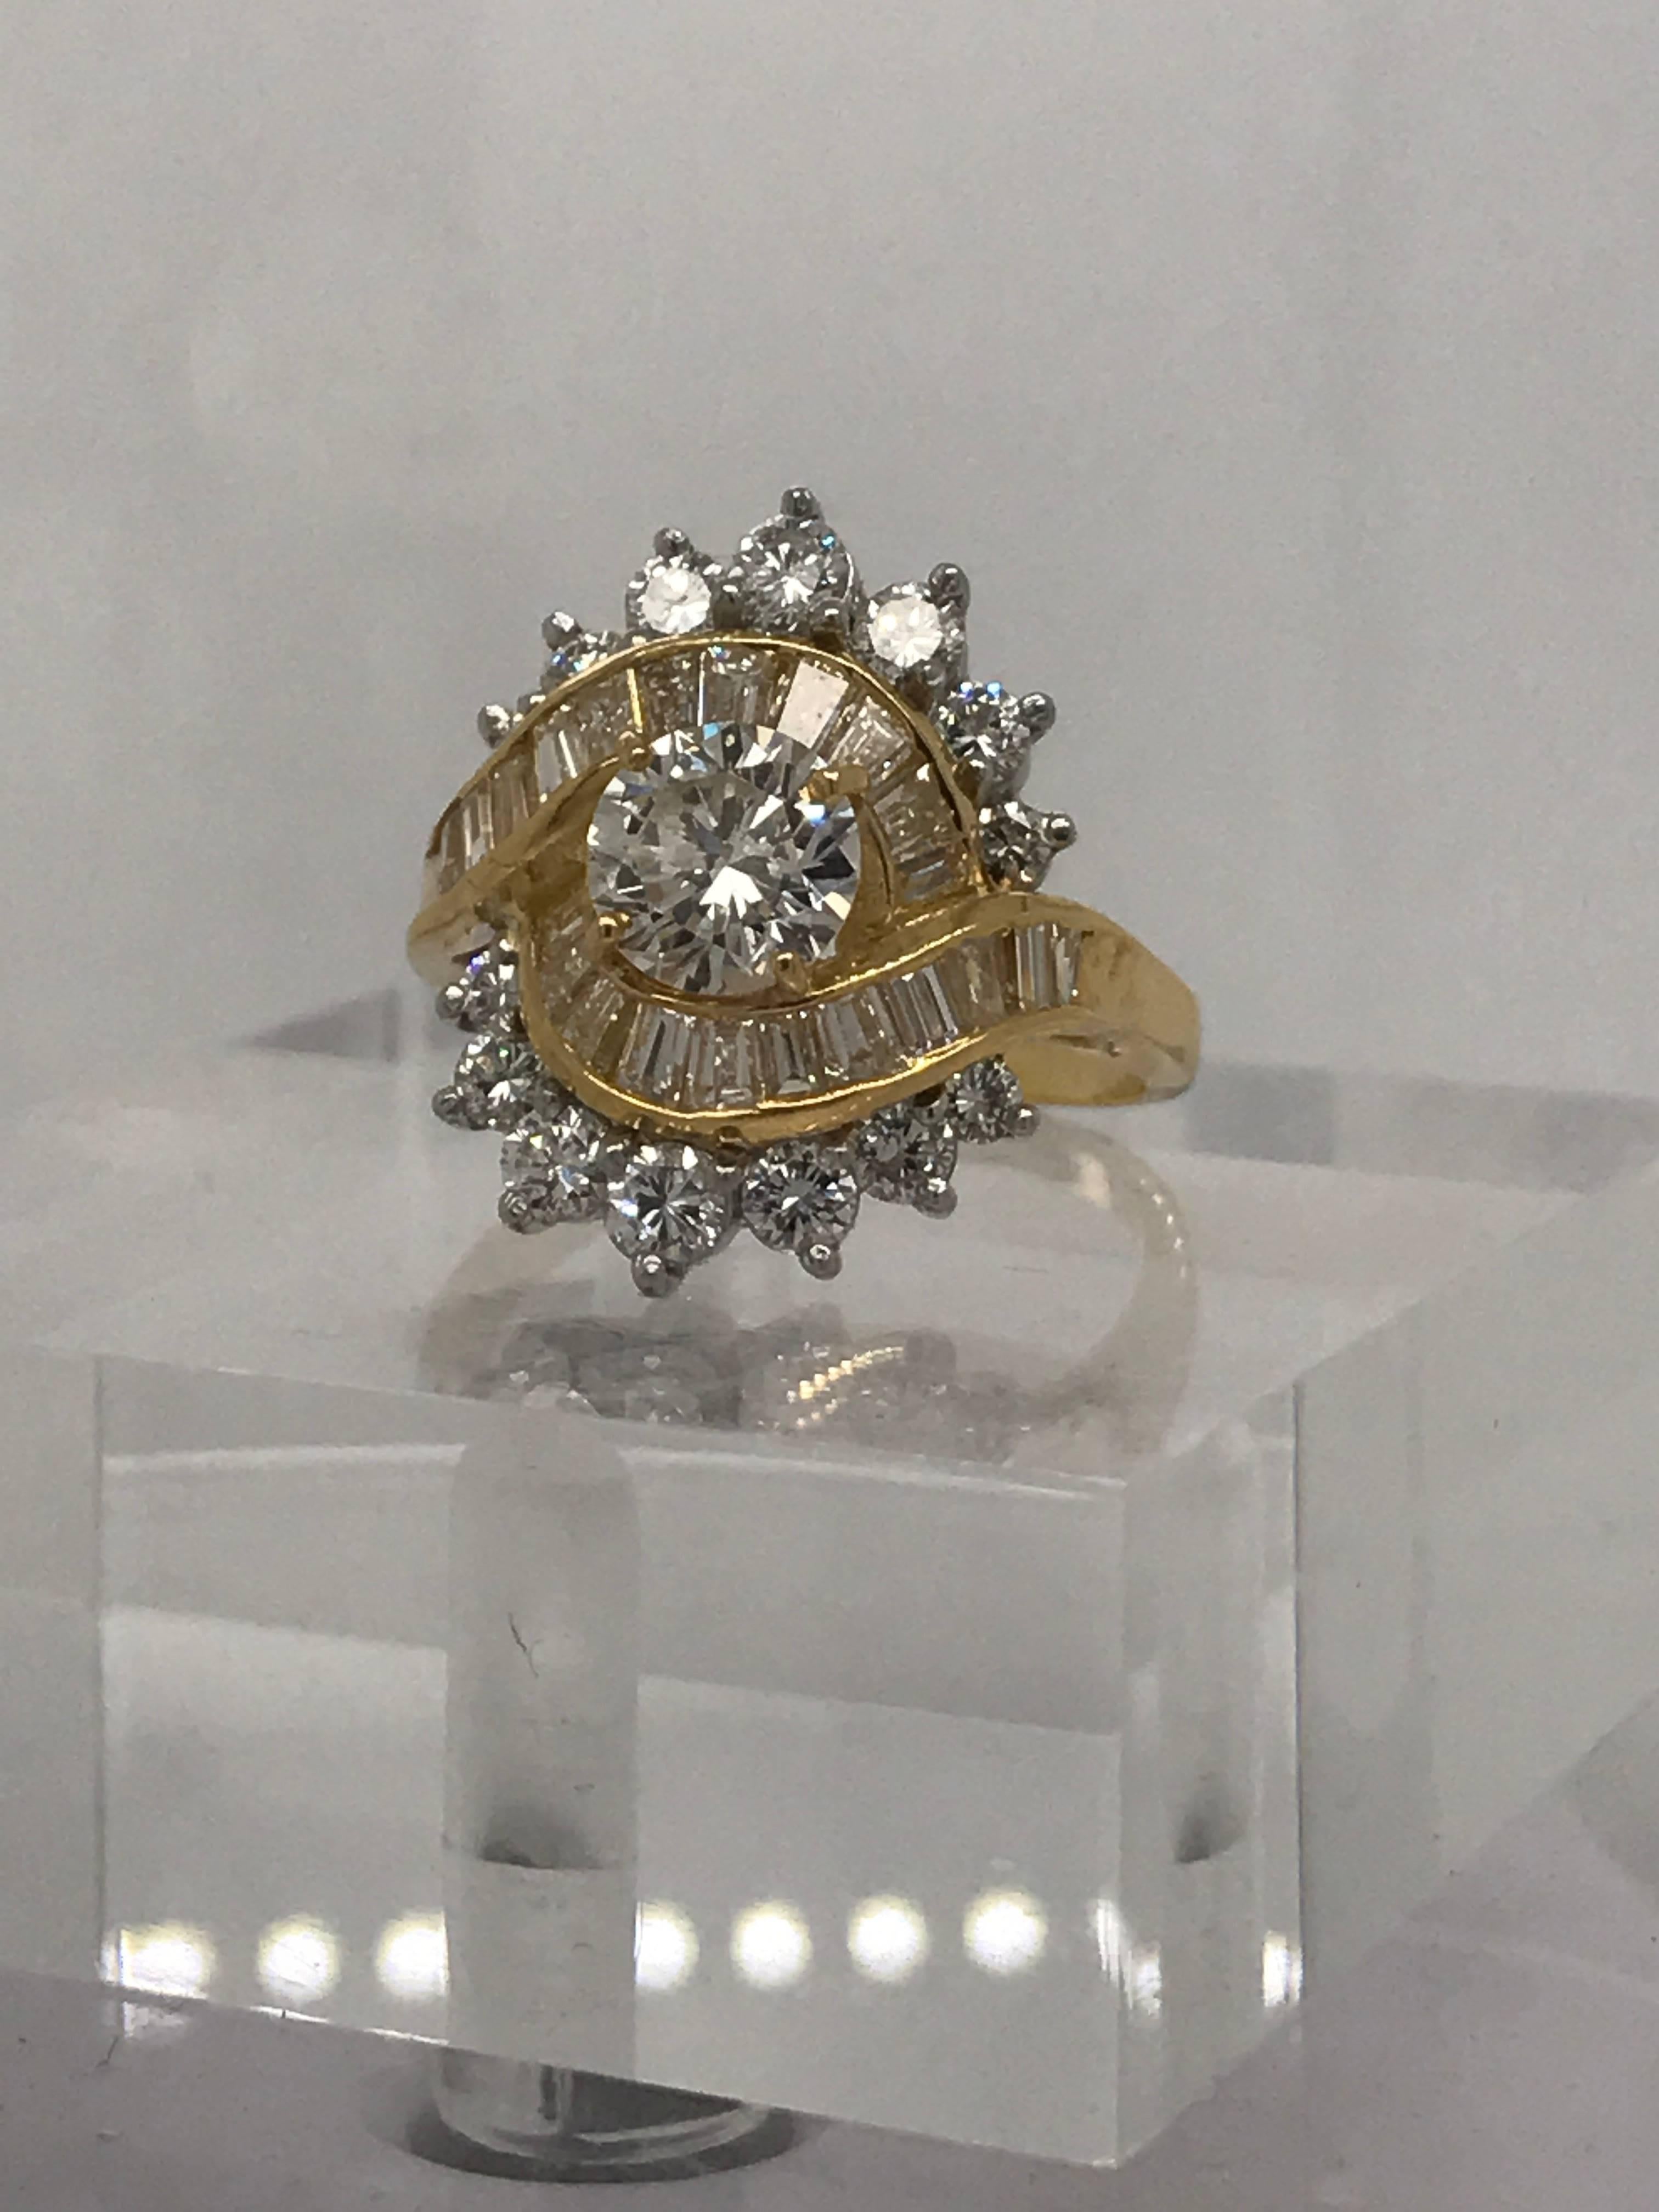 A beautiful ring with multiple different cuts of high-quality diamonds. The largest center stone weighs .99 carat and is graded a J color SI2 clarity. 14 more round accent diamonds total 1.10 carats and surround 22 baguette cut diamonds weighing